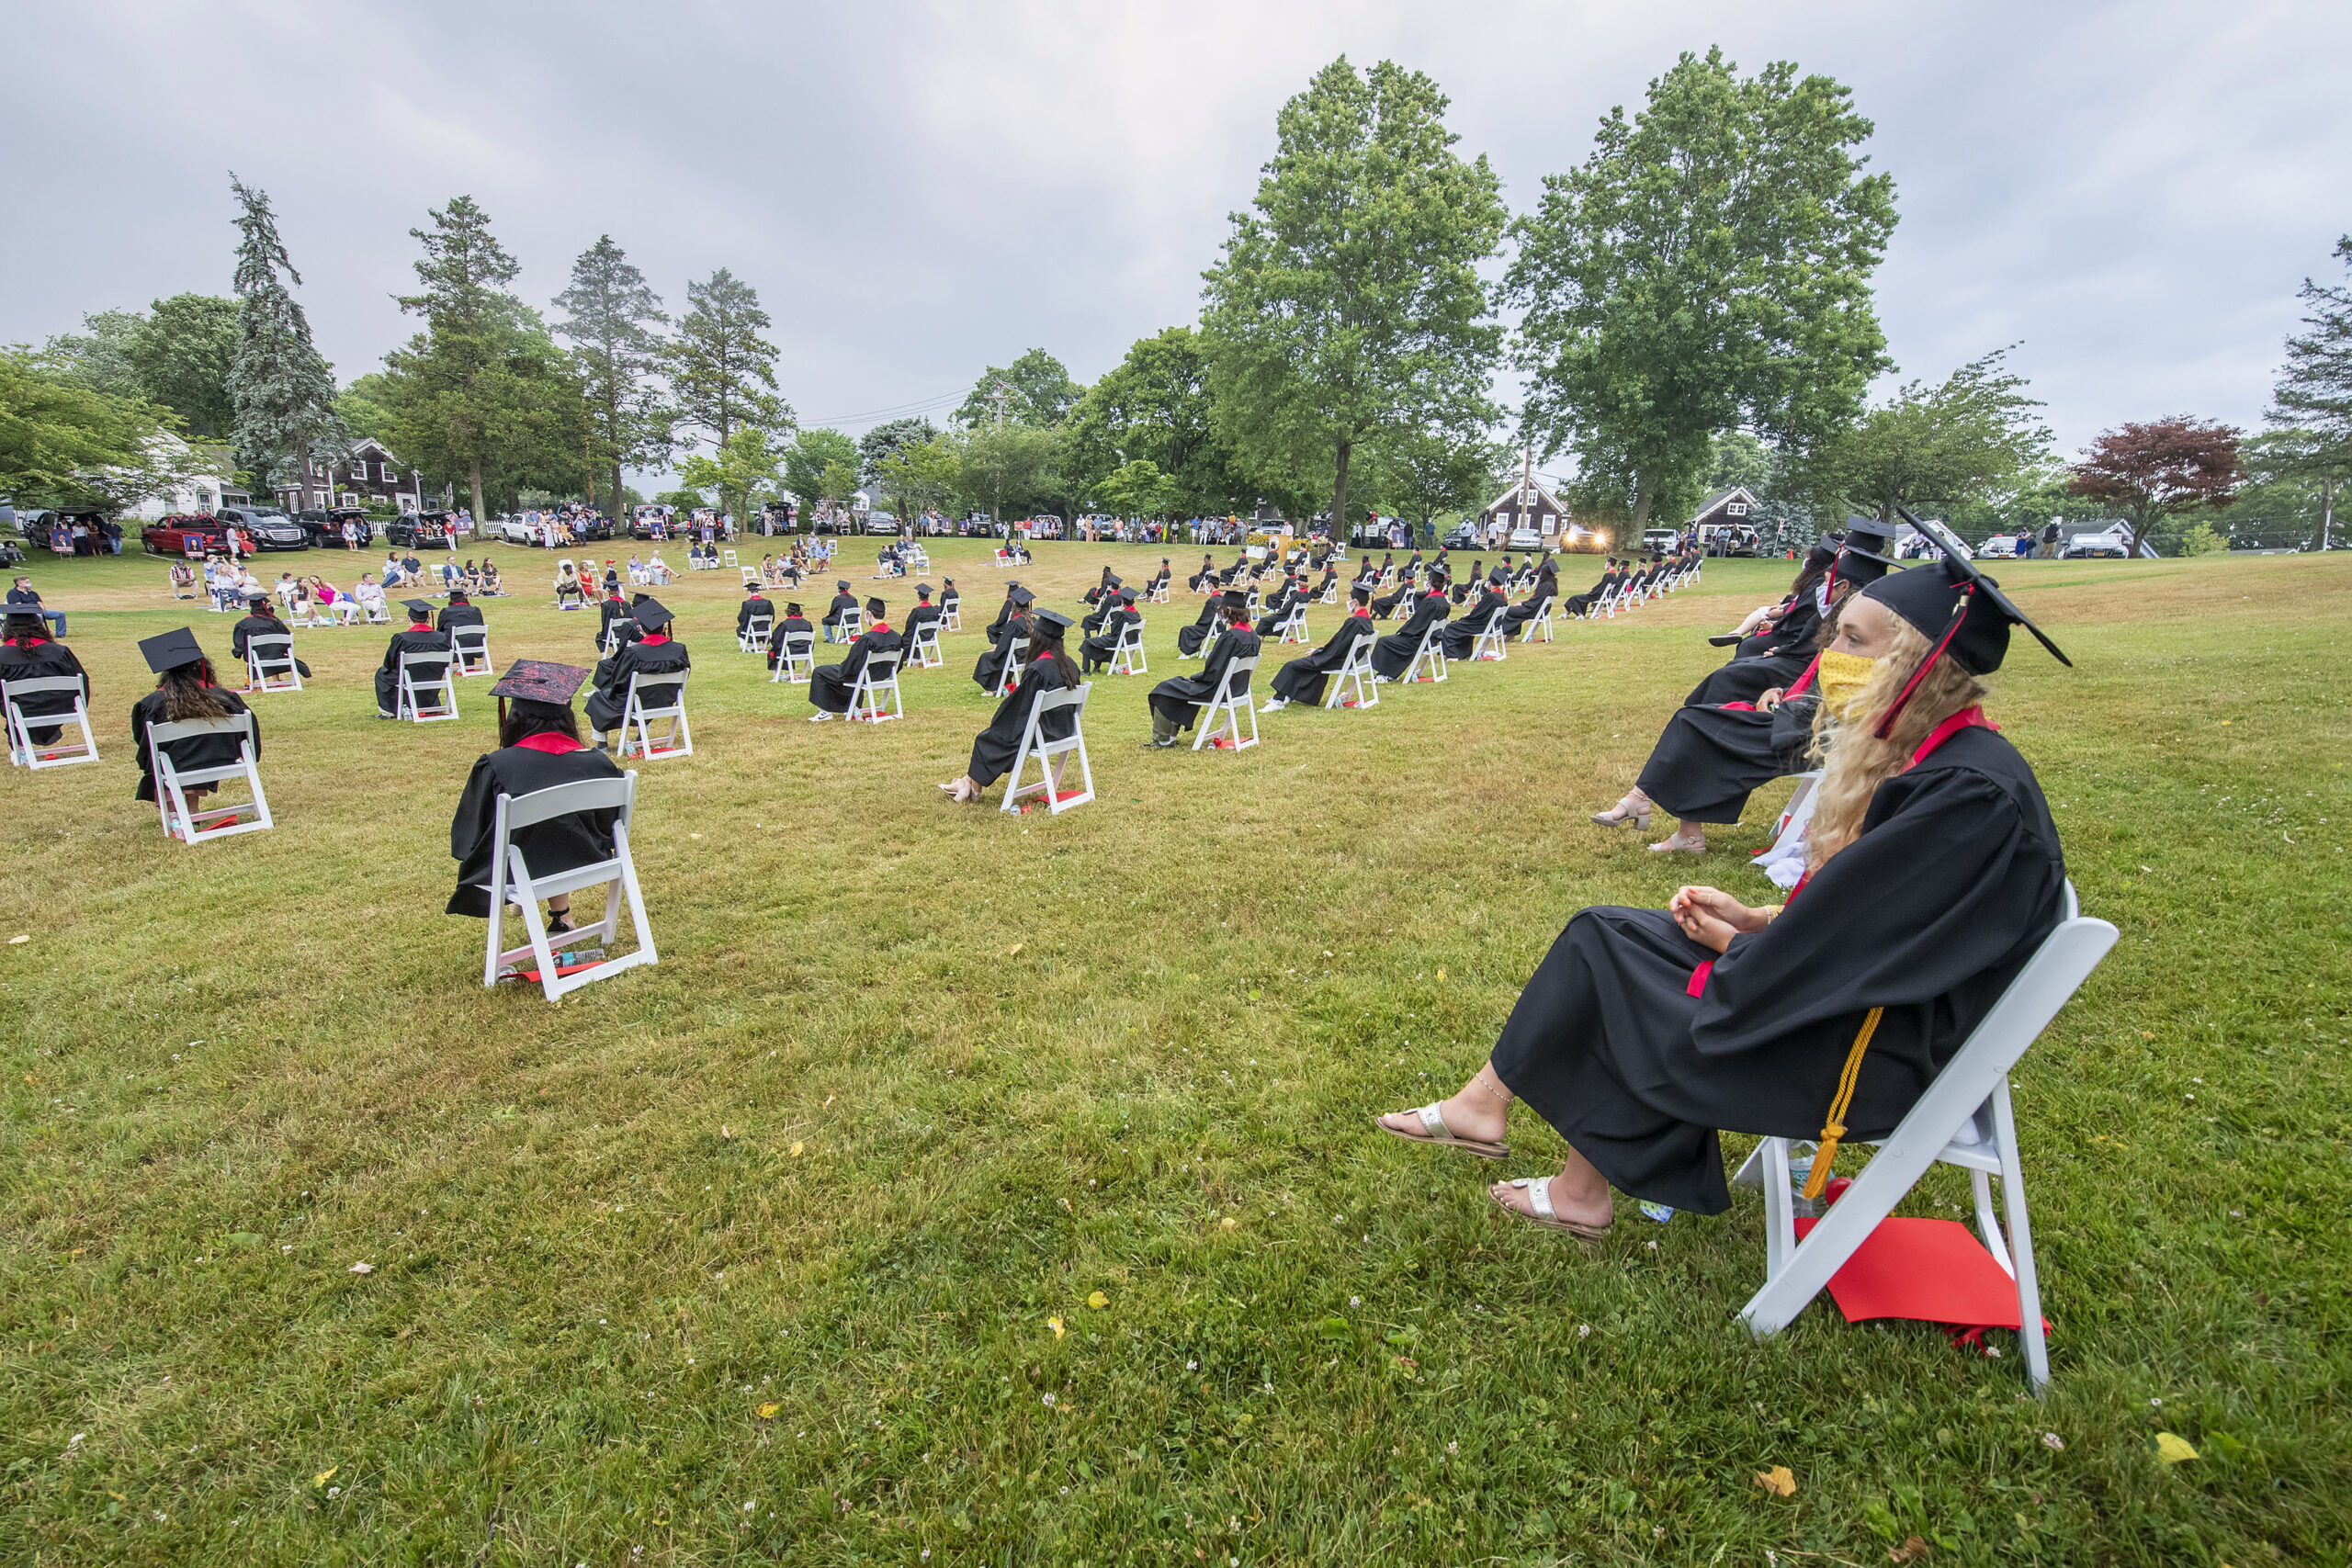 Senior Hallie Kneeland watches the proceedings during the Pierson High School 2020 Commencement Ceremony at Pierson High School on June 27, 2020. Students were seated at a safe distance from each other due to COVID 19.  MICHAEL HELLER